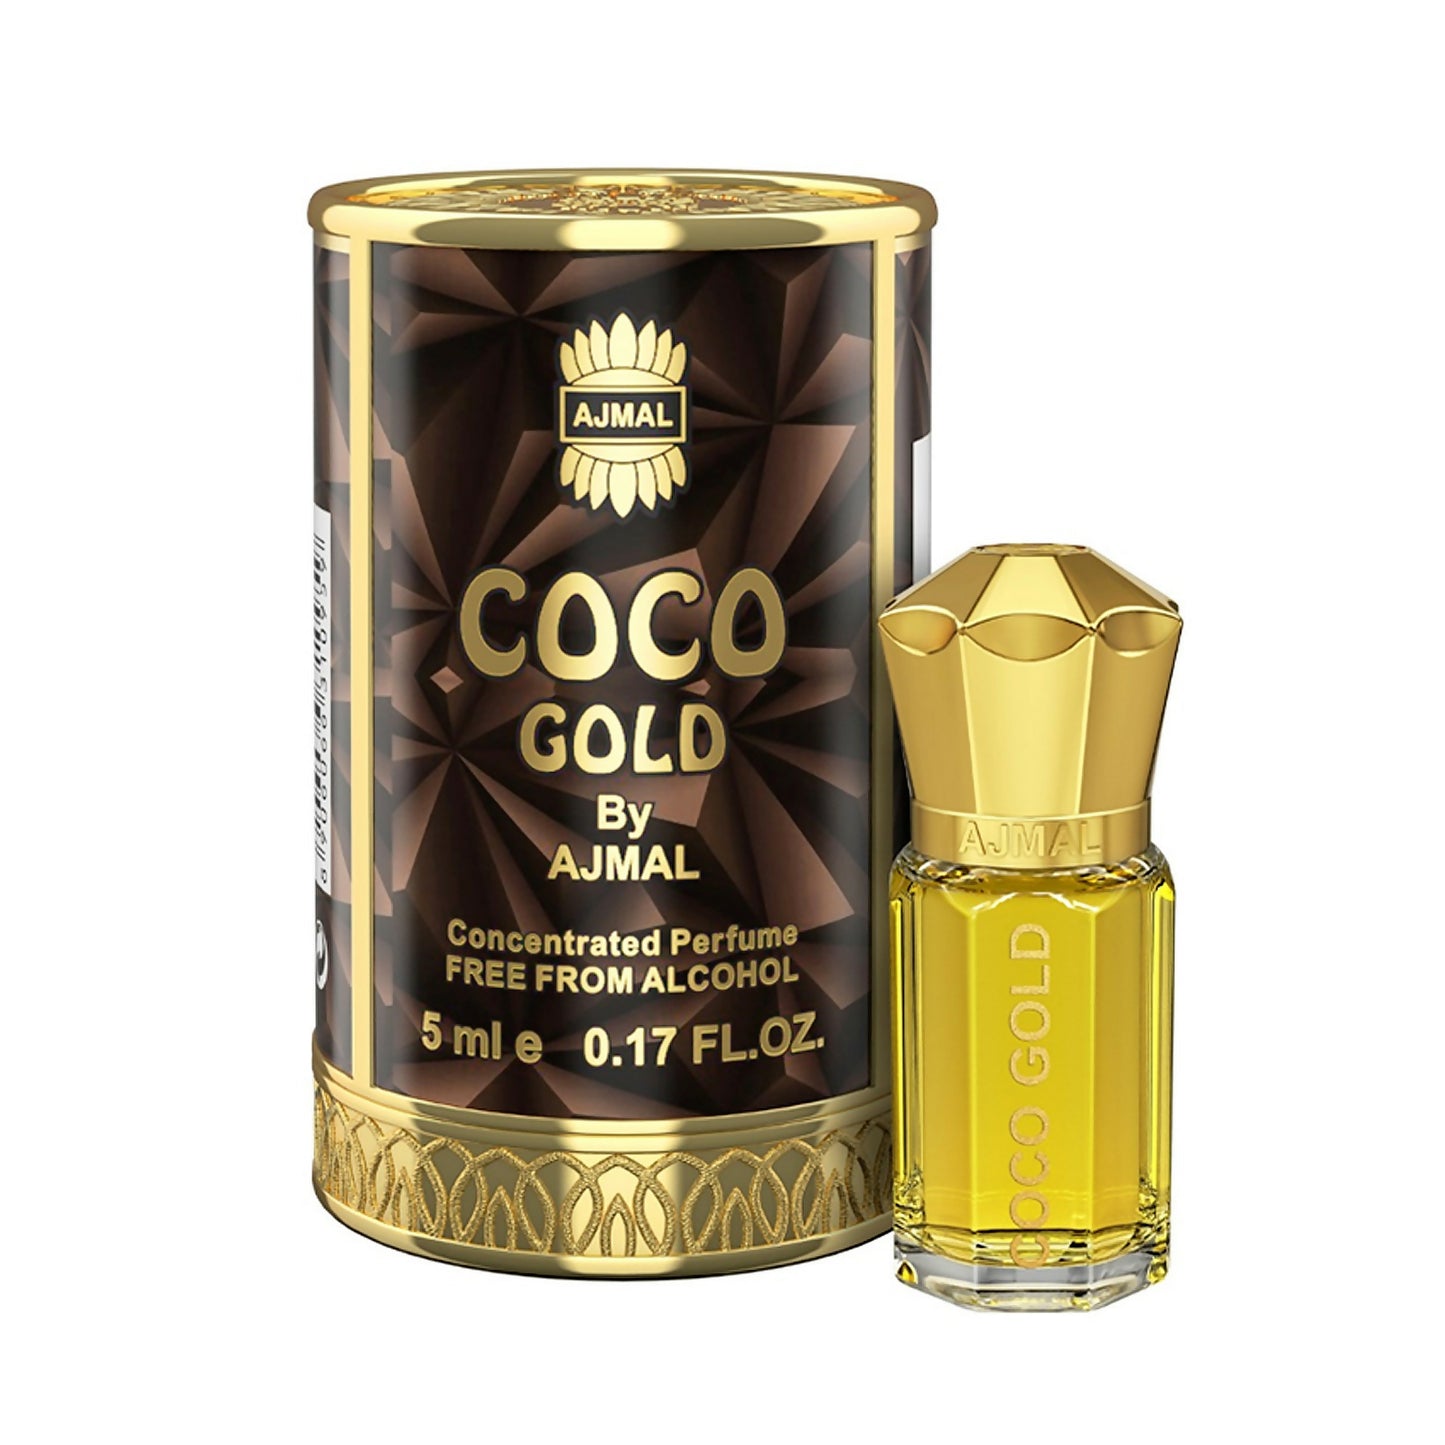 Ajmal COCO GOLD Attar | Floral & Sweet Fragrance | Non-Alcoholic | Long Lasting Attar For Women - 5 ML